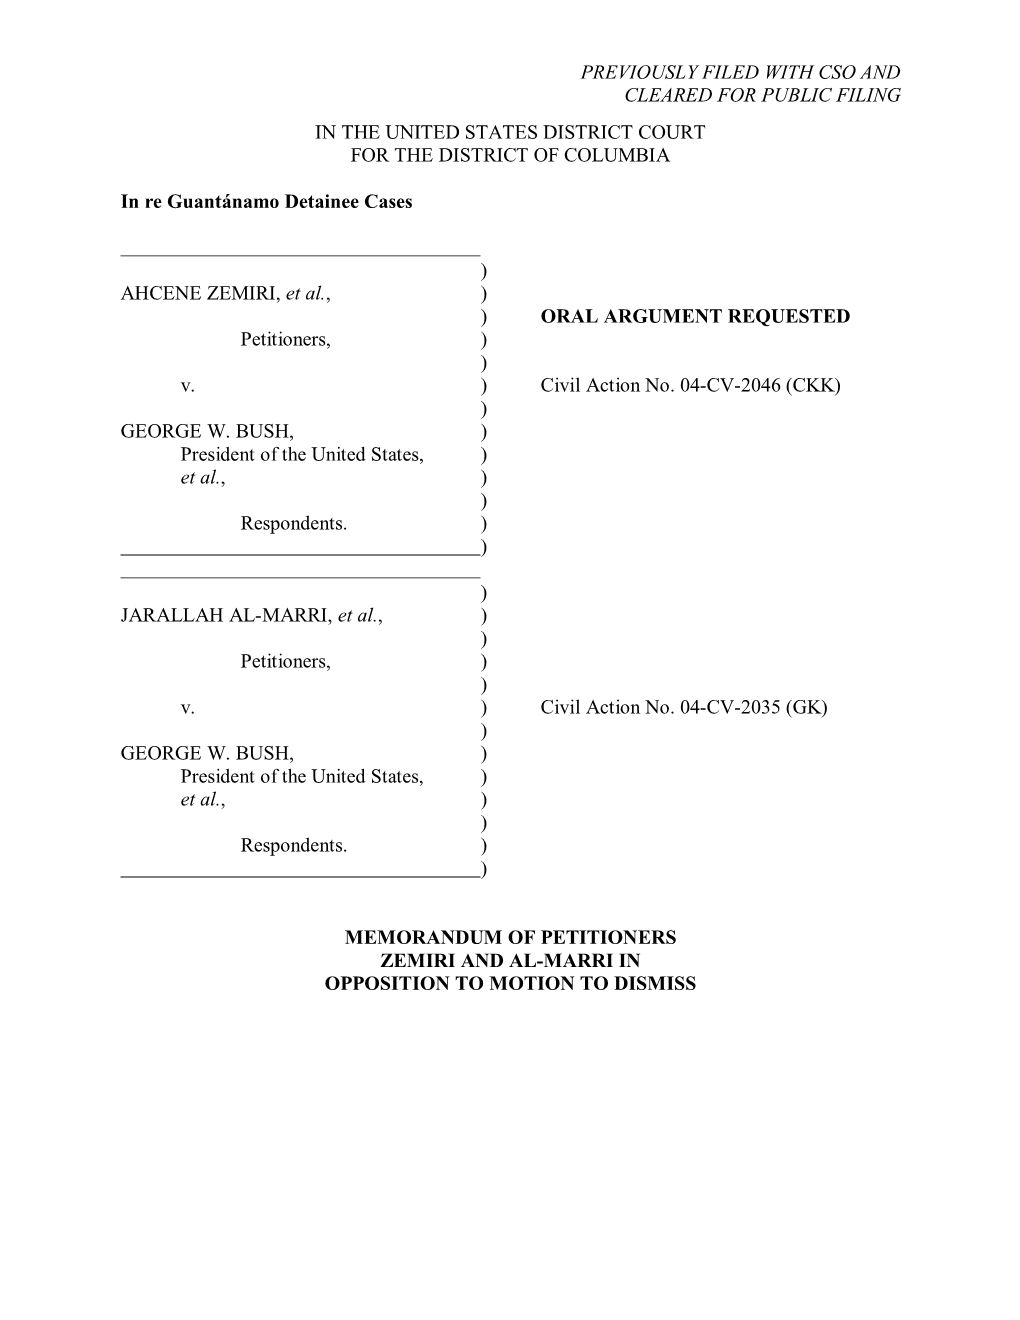 Previously Filed with Cso and Cleared for Public Filing in the United States District Court for the District of Columbia